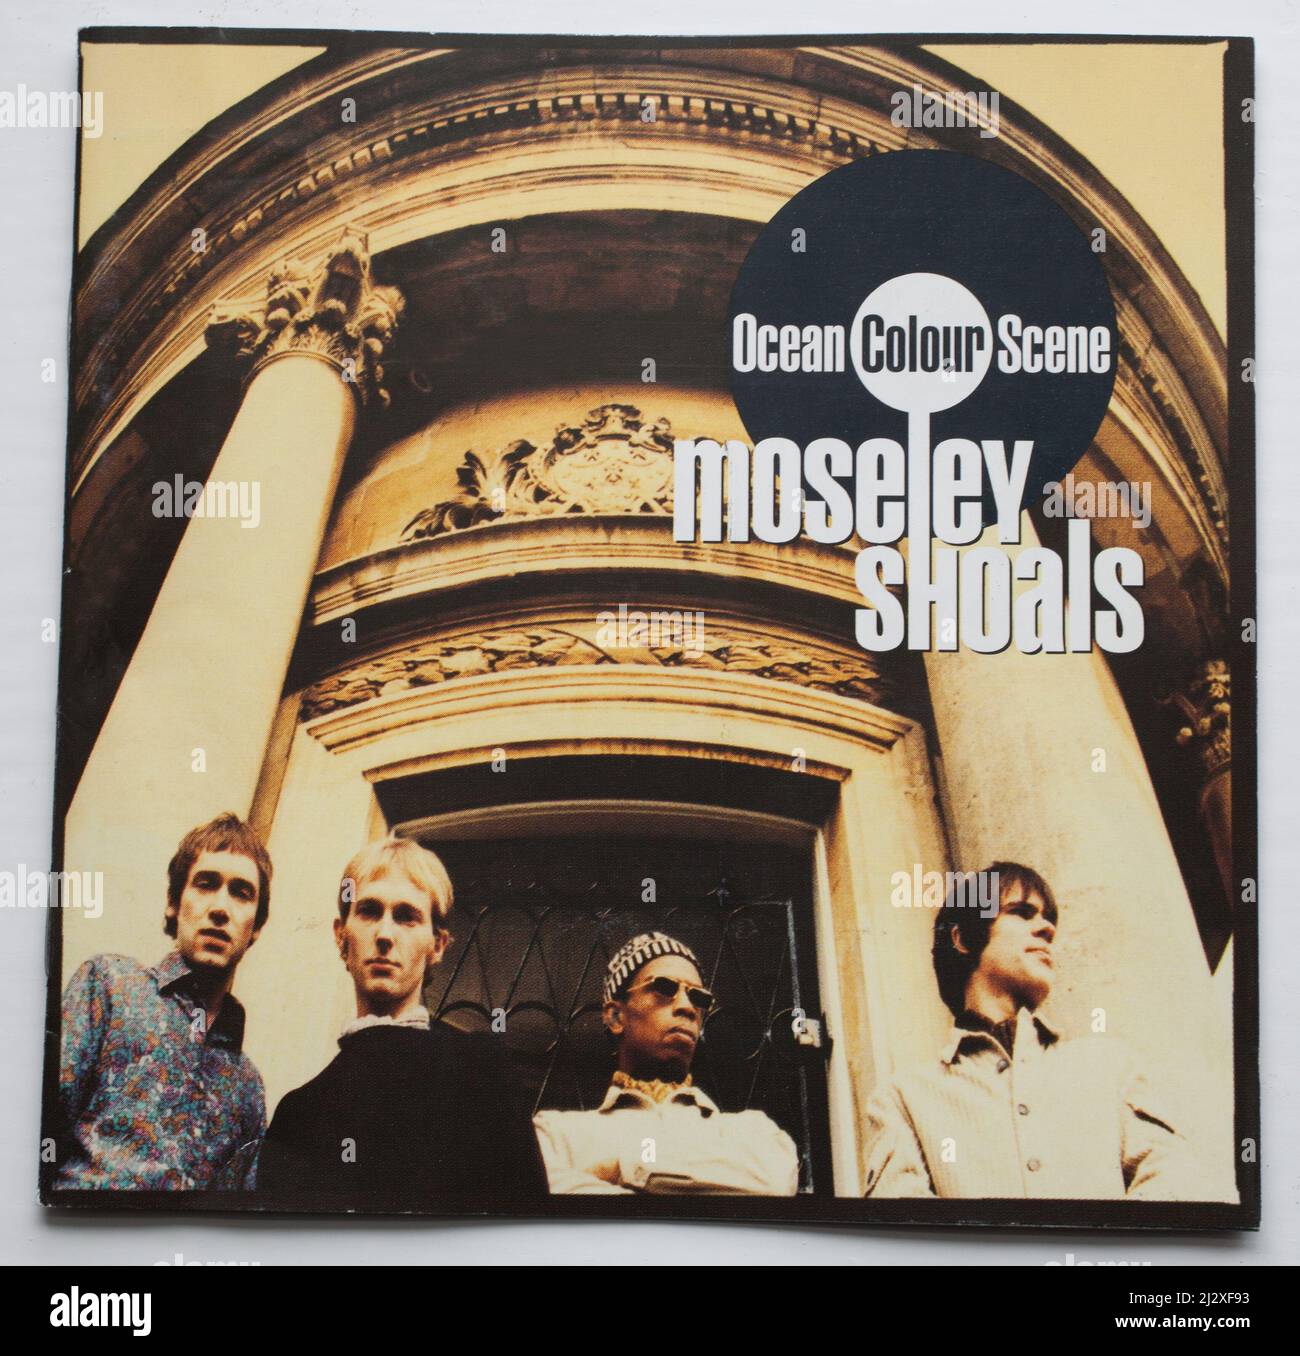 The CD Album cover to Moseley Shoals by Ocean Colour Scene Stock Photo